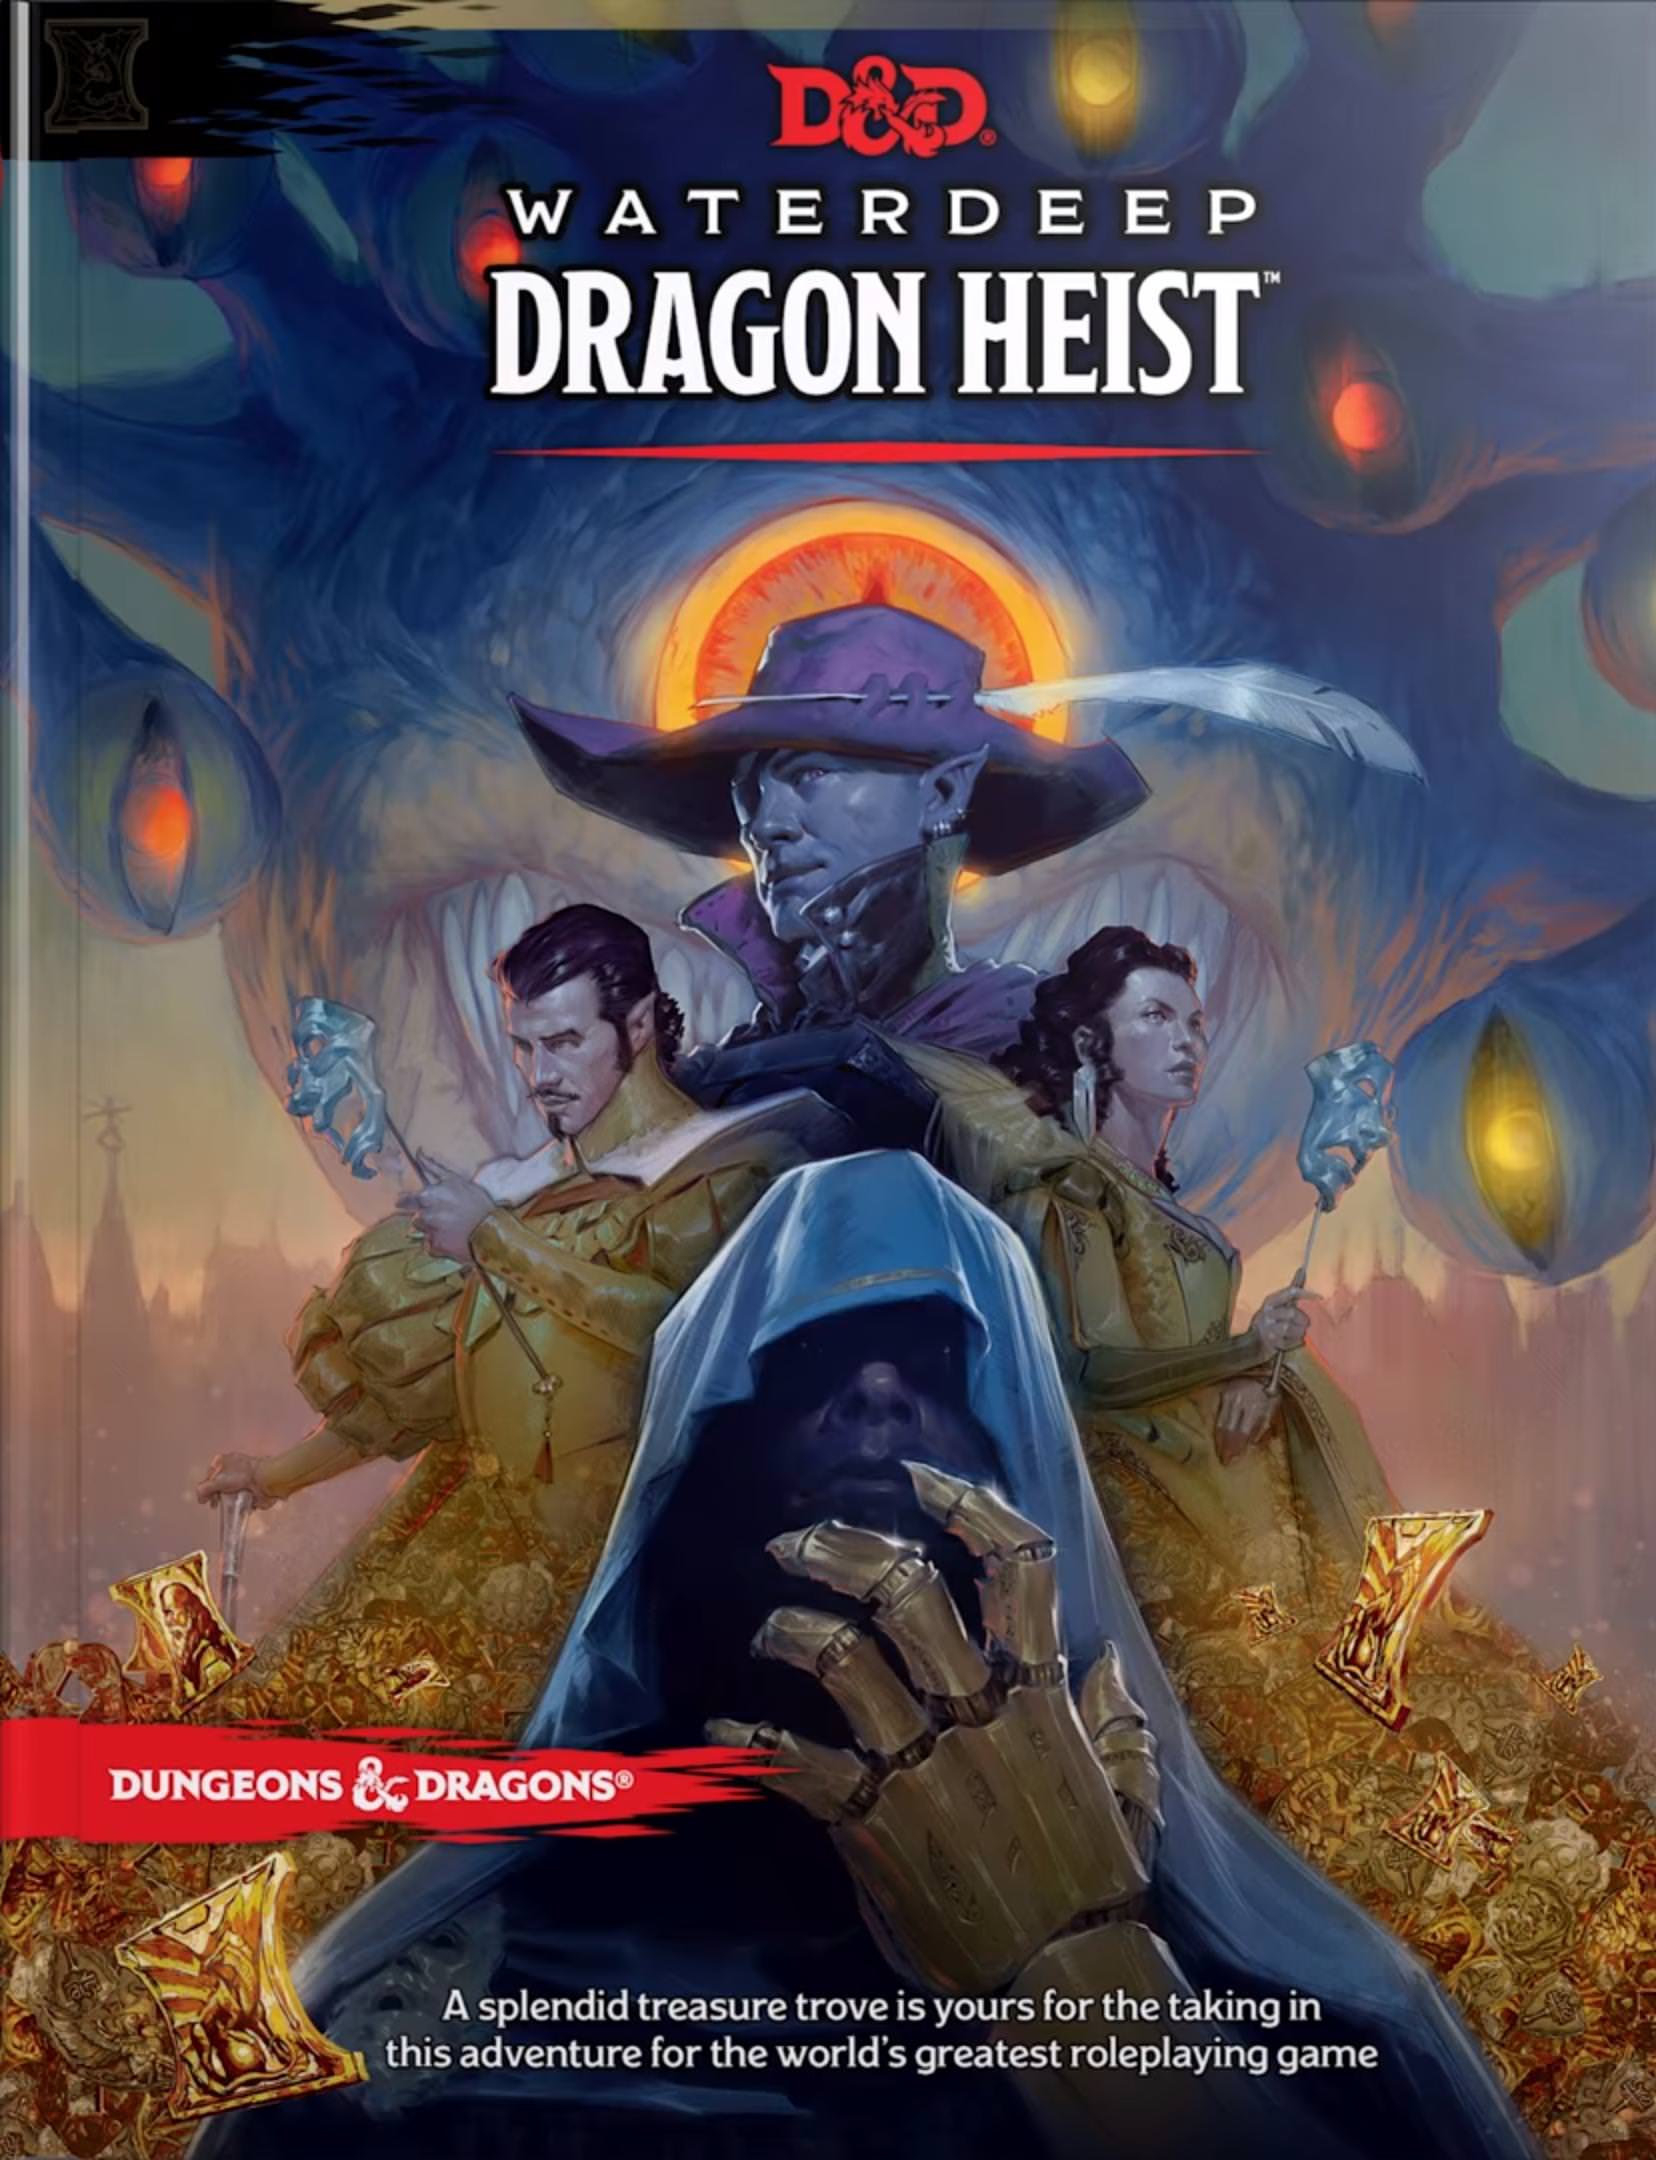 take-a-trip-to-waterdeep-with-two-new-dungeons-dragons-books-soon-ontabletop-home-of